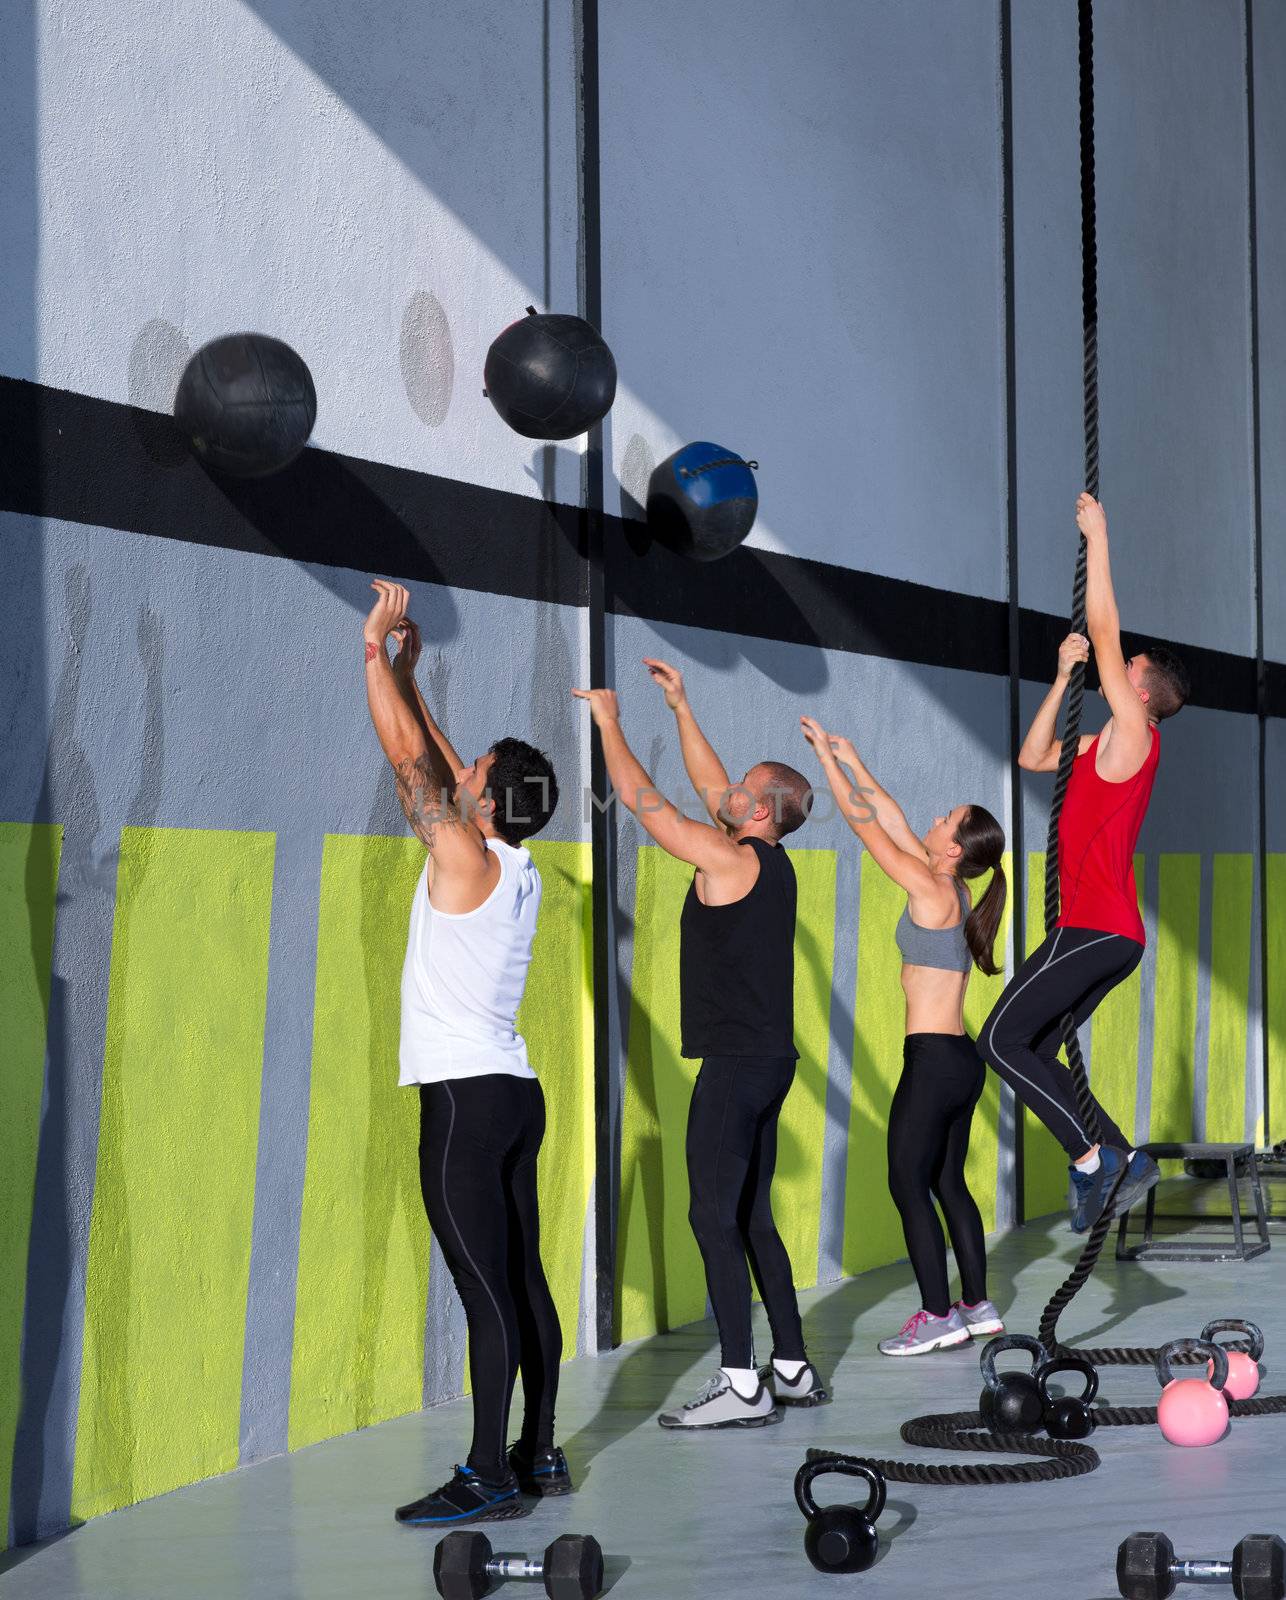 Crossfit workout people group with wall balls and rope by lunamarina